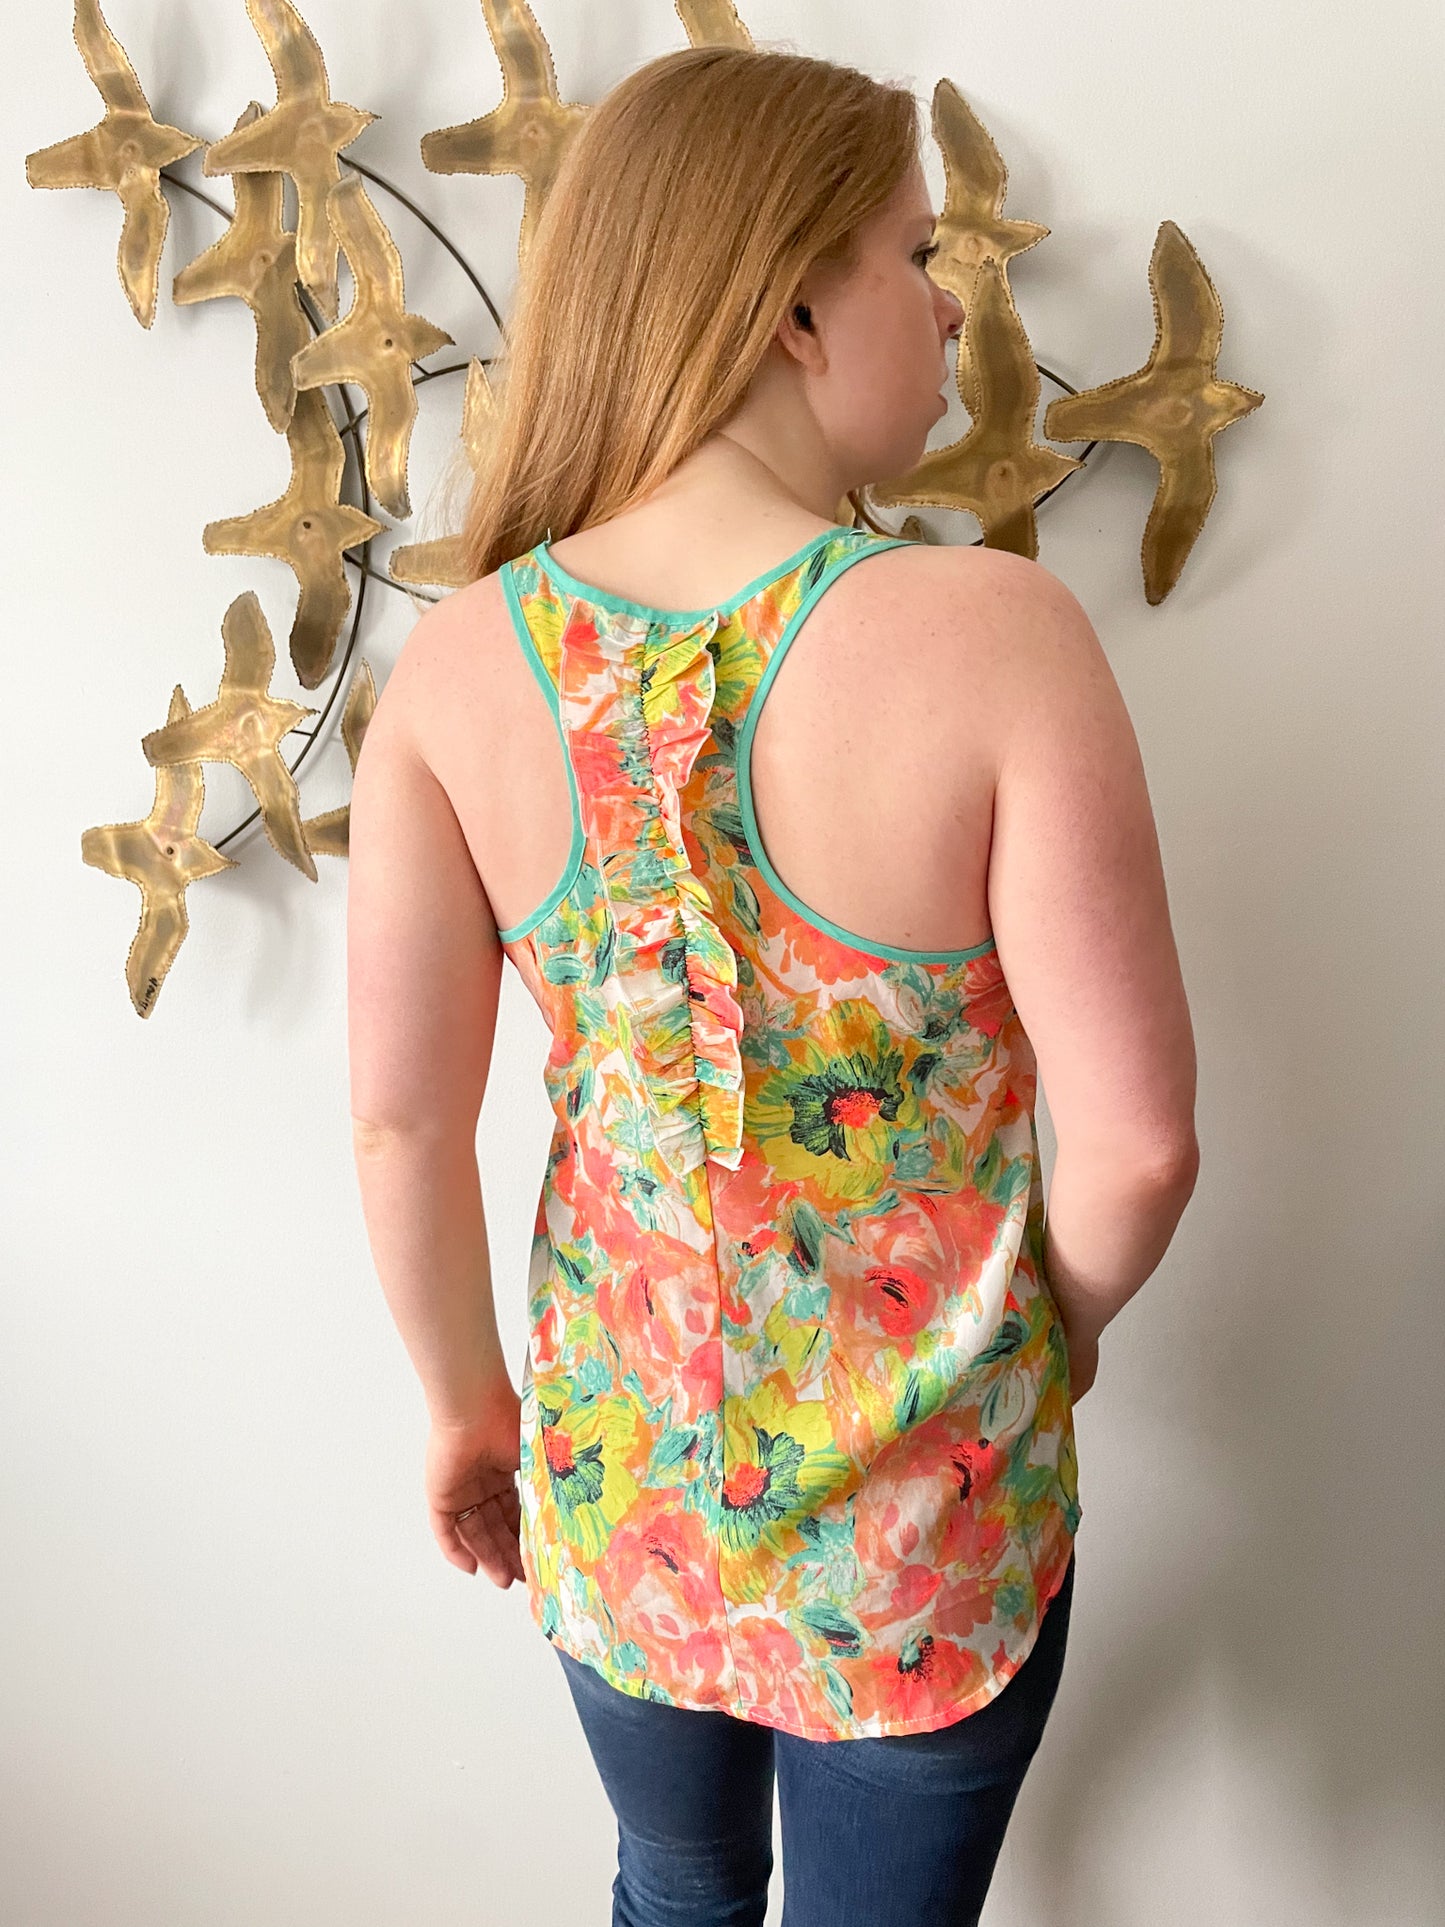 Candie's Neon Floral Ruffle Sleeveless Top - Small